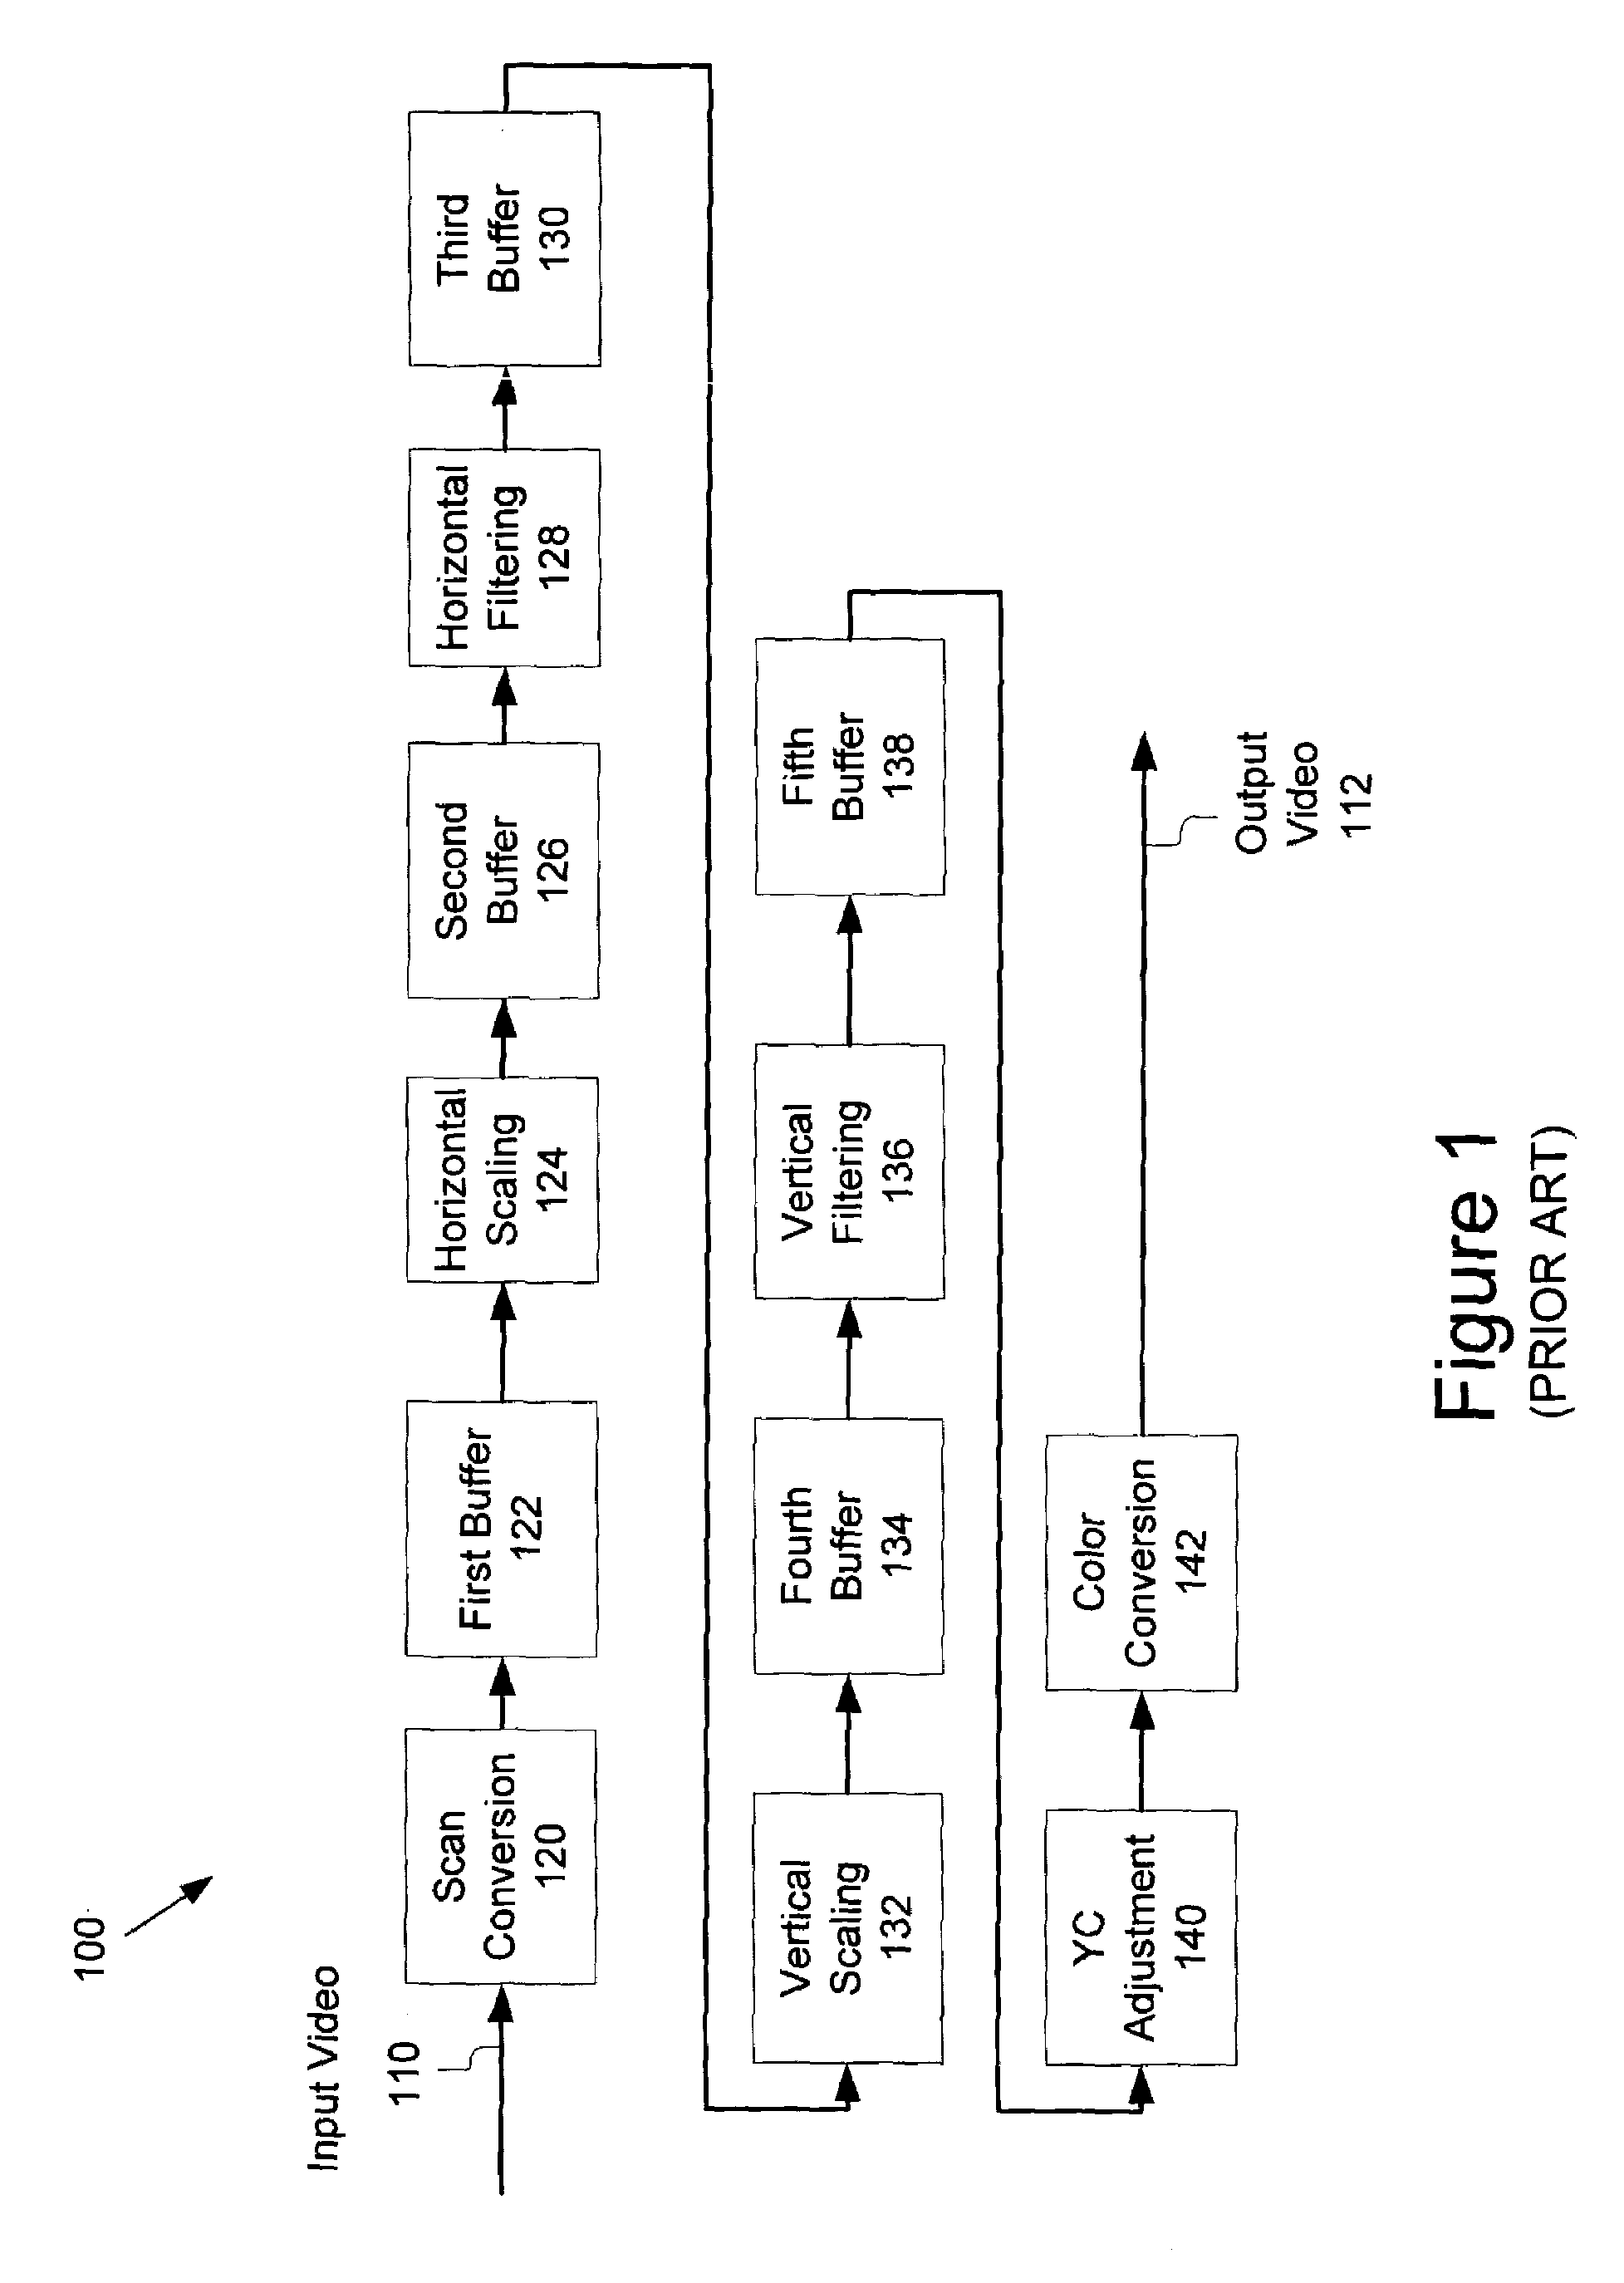 Method and system for scaling, filtering, scan conversion, panoramic scaling, YC adjustment, and color conversion in a display controller